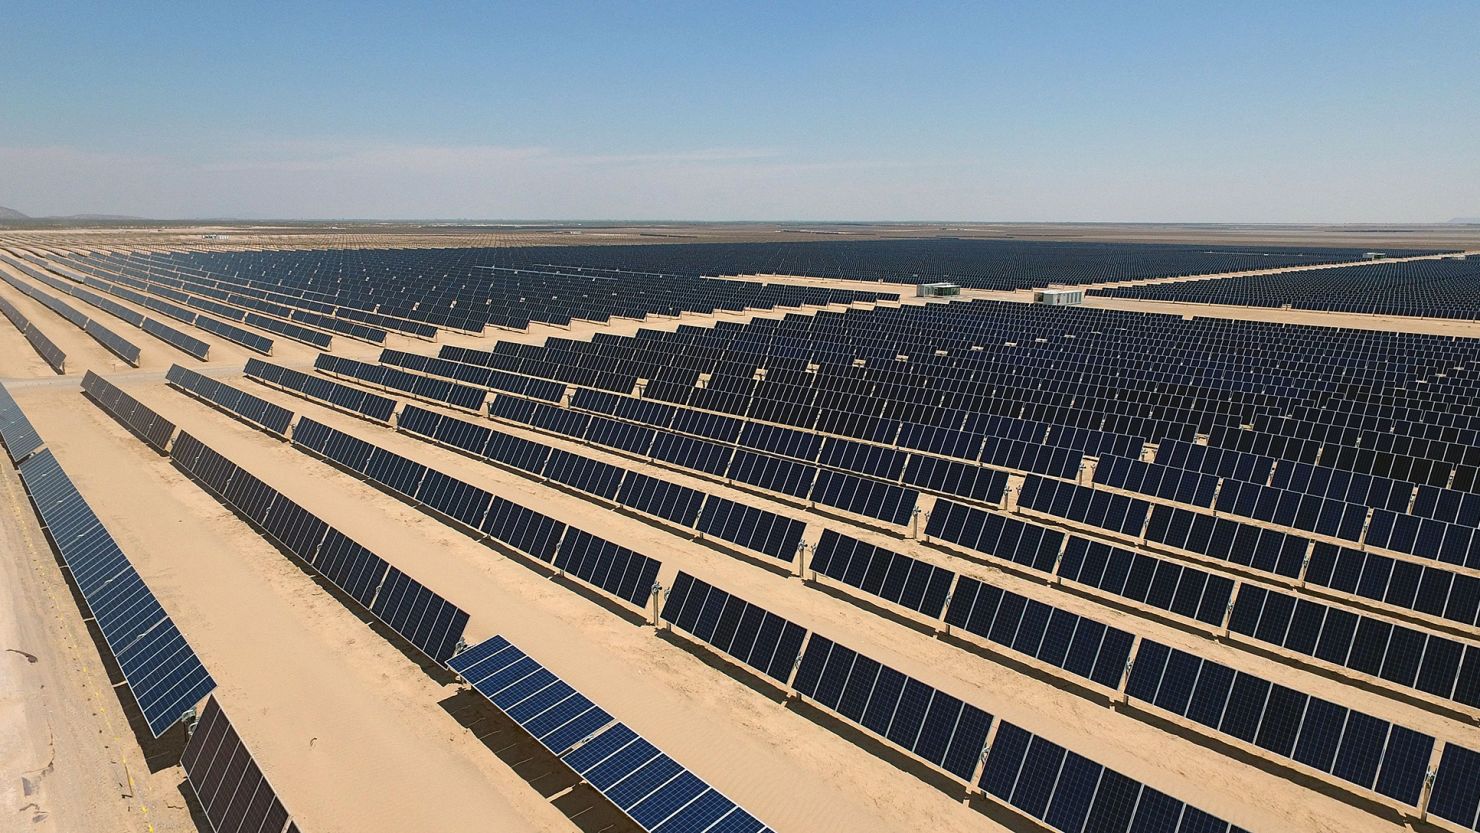 The Villanueva solar power plant in Coahuila State, Mexico. Solar power boomed in 2023, the fastest growing source of electricity generation for the 19th year running, according to new data.